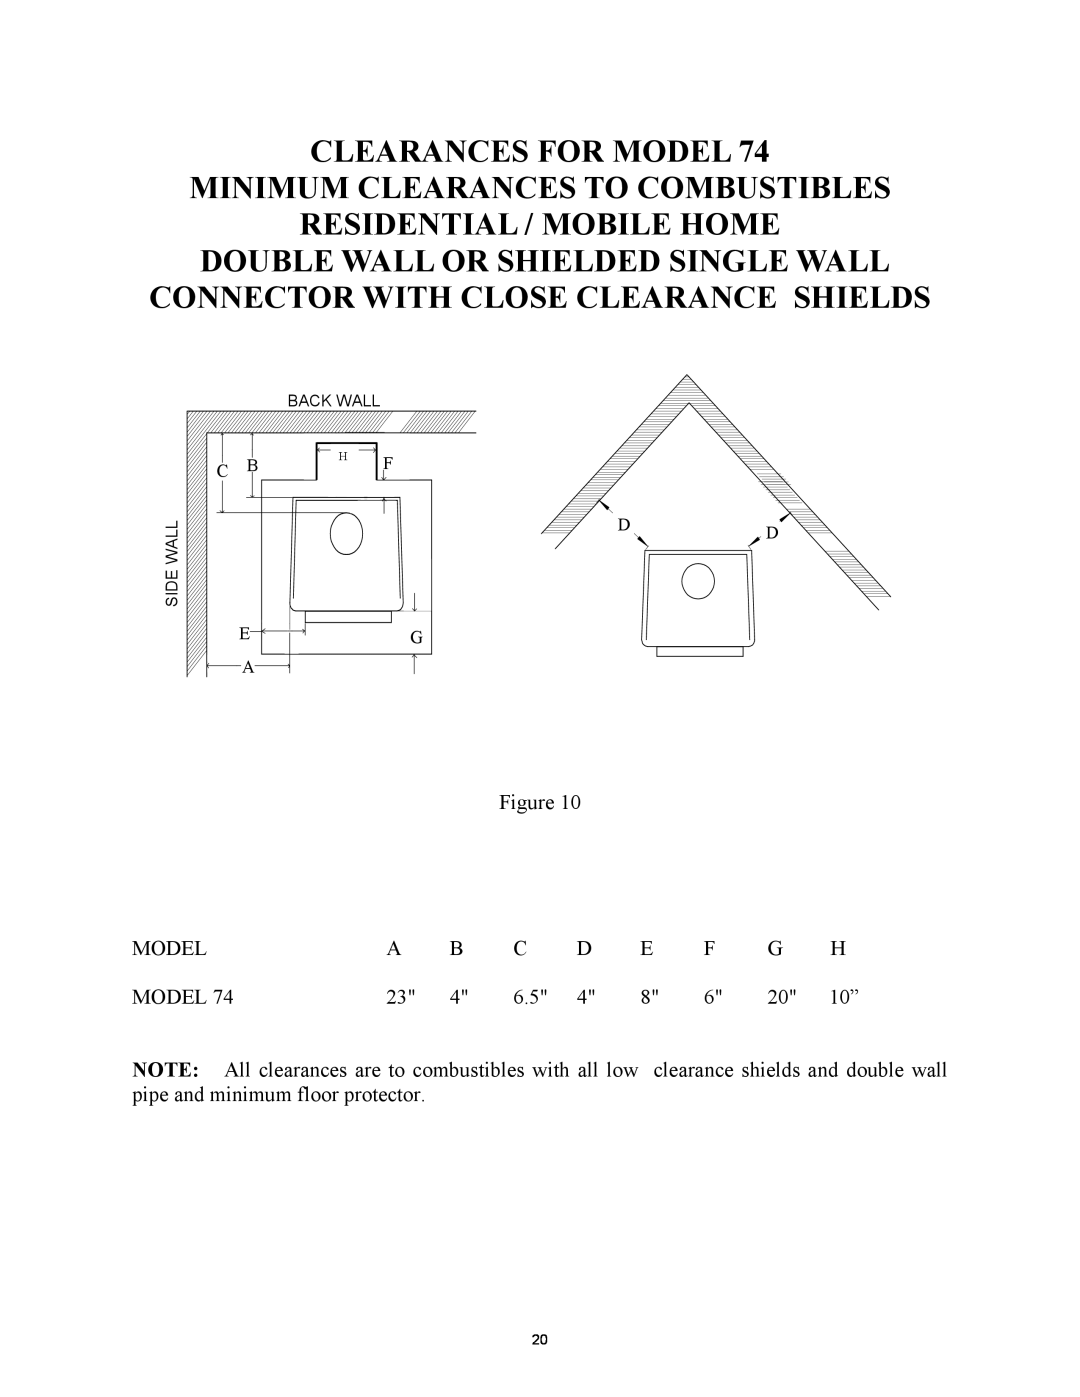 New Buck Corporation 74 Minimum Clearances To Combustibles, Residential / Mobile Home, Clearances For Model 